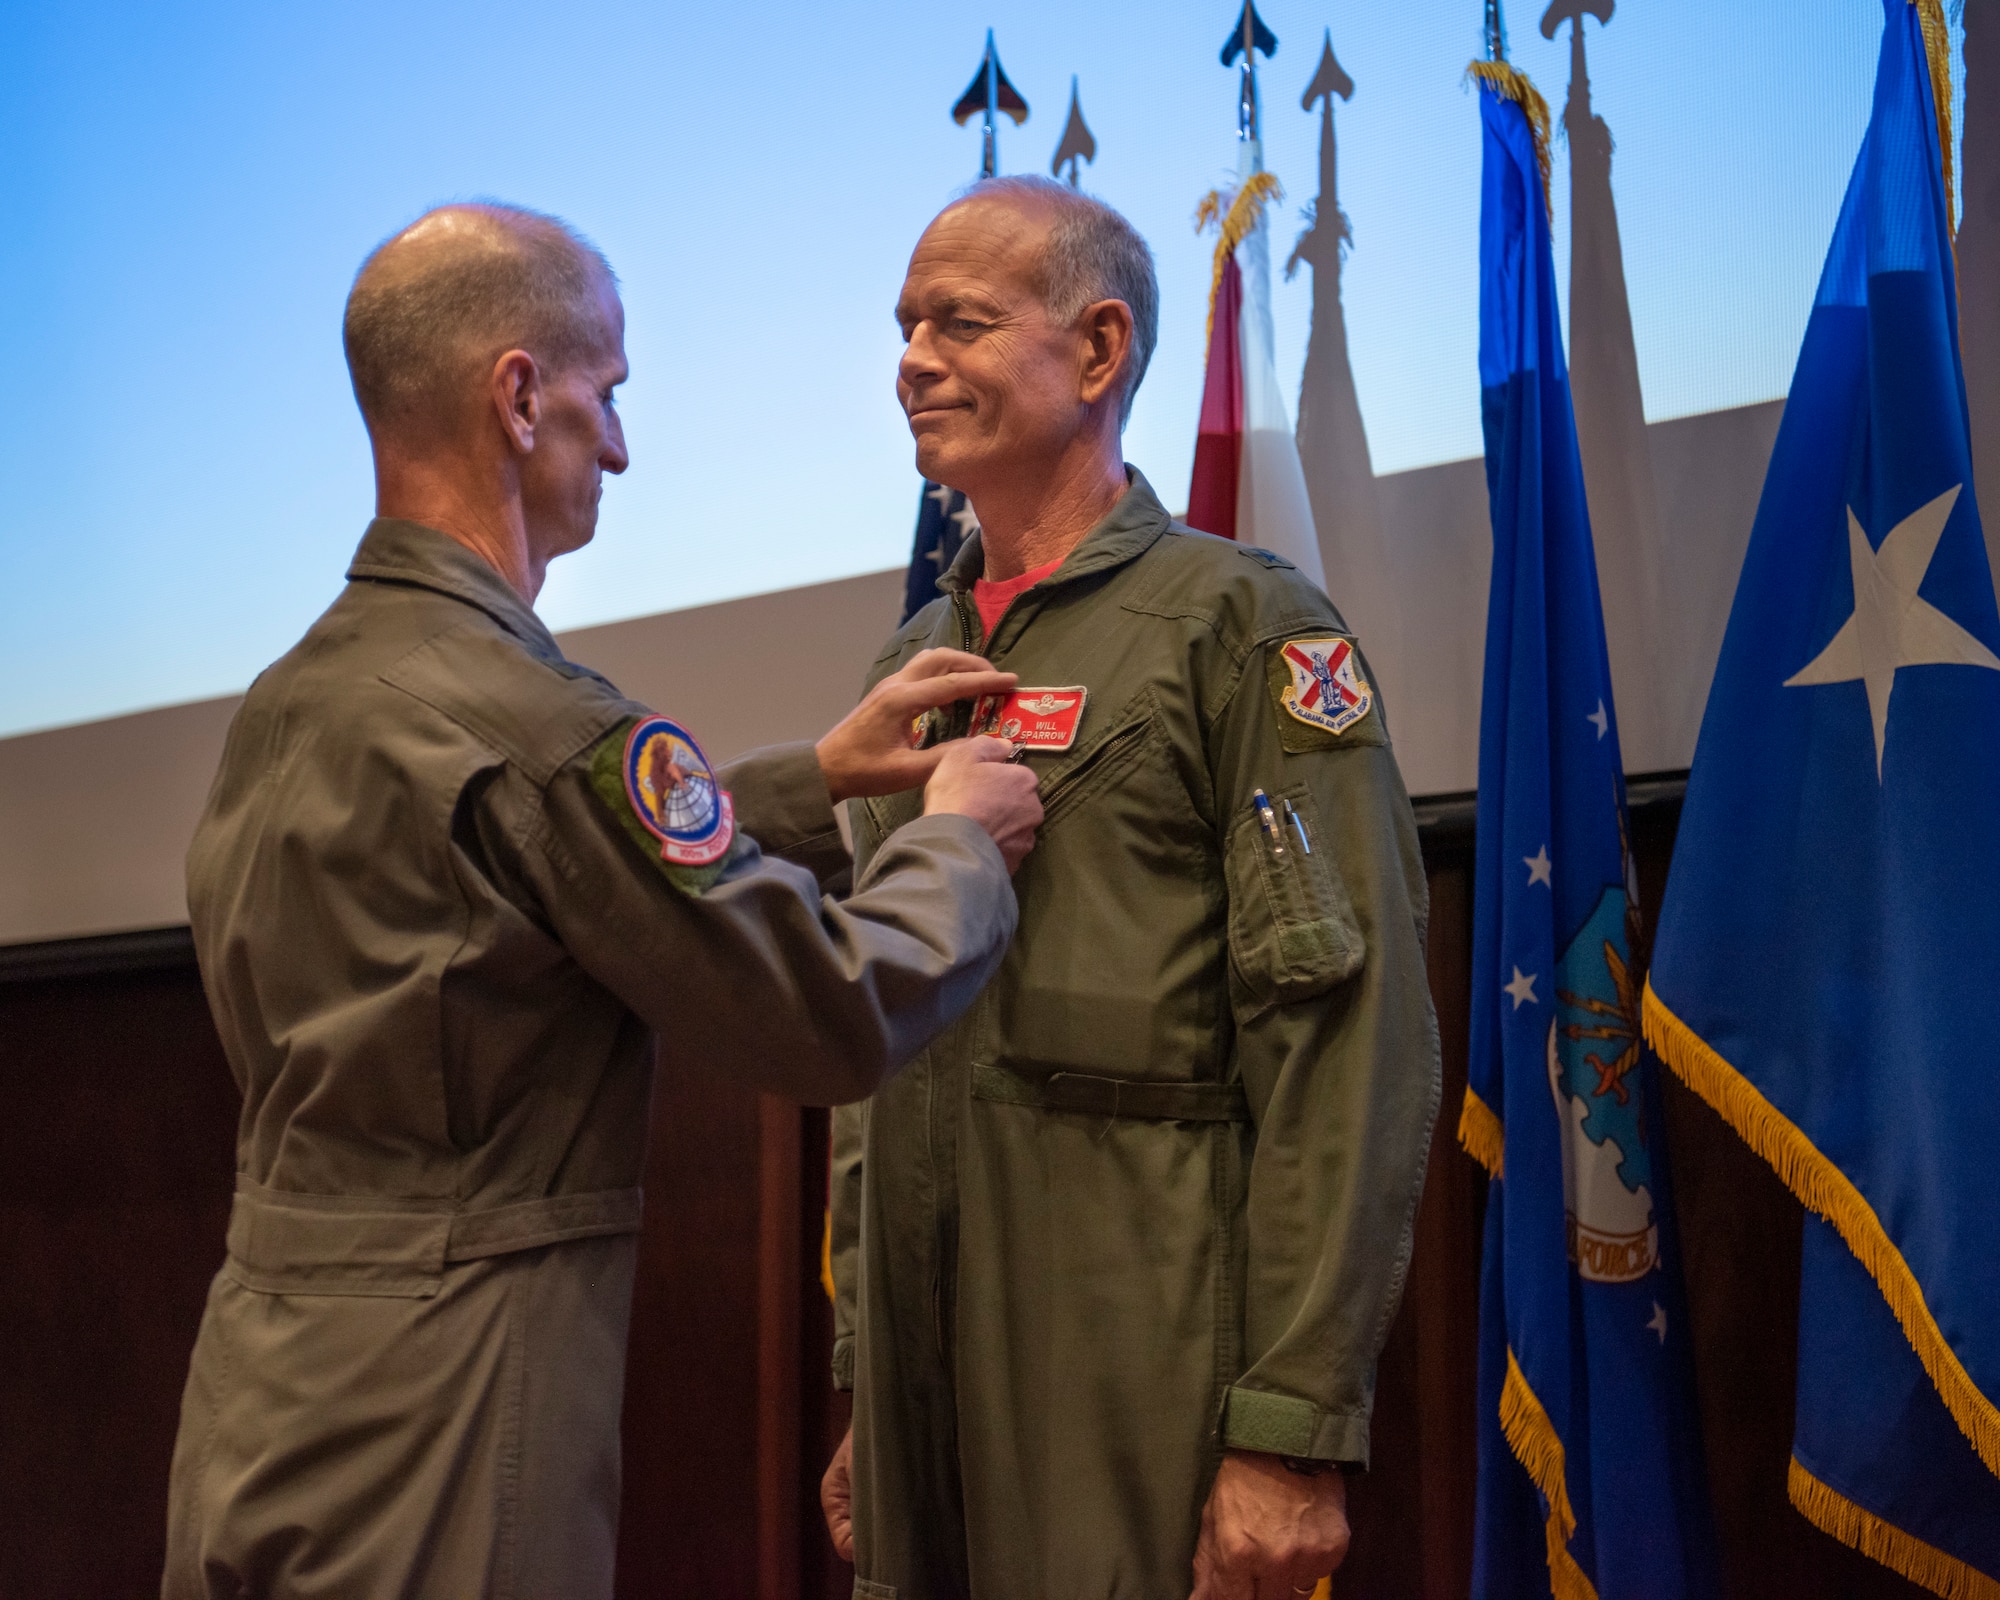 Brig. Gen. William Sparrow, Alabama National Guard Assistant Adjutant General - Air, receives the Distinguished Service Medal of Alabama from Maj. Gen. Randall K. Efferson, Air National Guard Assistant to the Commander, U.S. Air Forces Central Command, at a retirement ceremony May 15, 2021, at Dannelly Field, Ala. Sparrow retired with over 36 years of military service to his state and nation. (U.S. Air National Guard photo by Staff Sgt. Hayden Johnson)